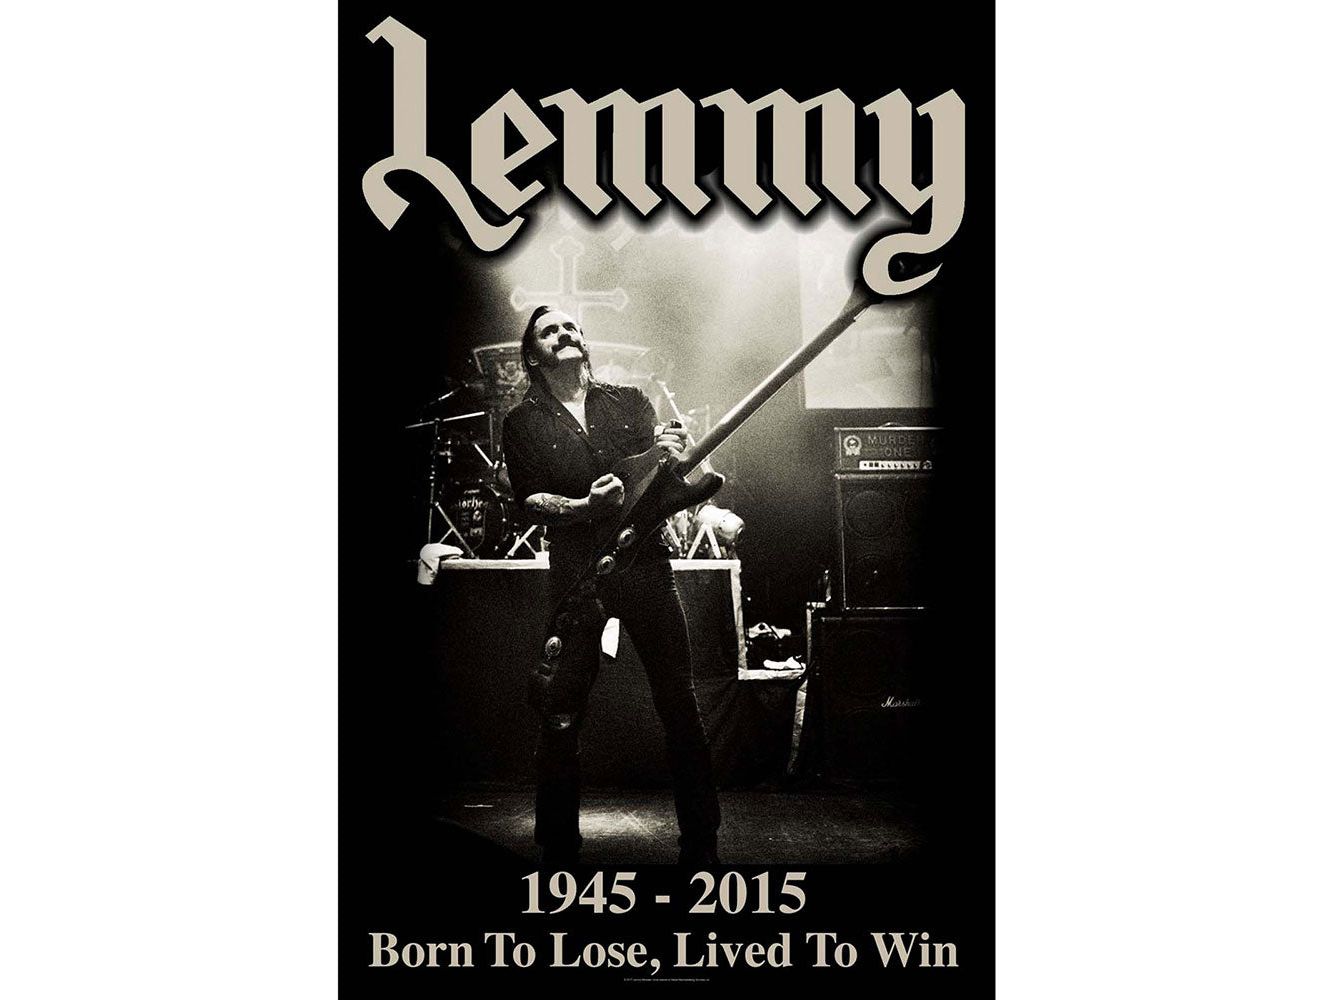 Motorhead Lemmy 'Lived to Win' Textile Poster